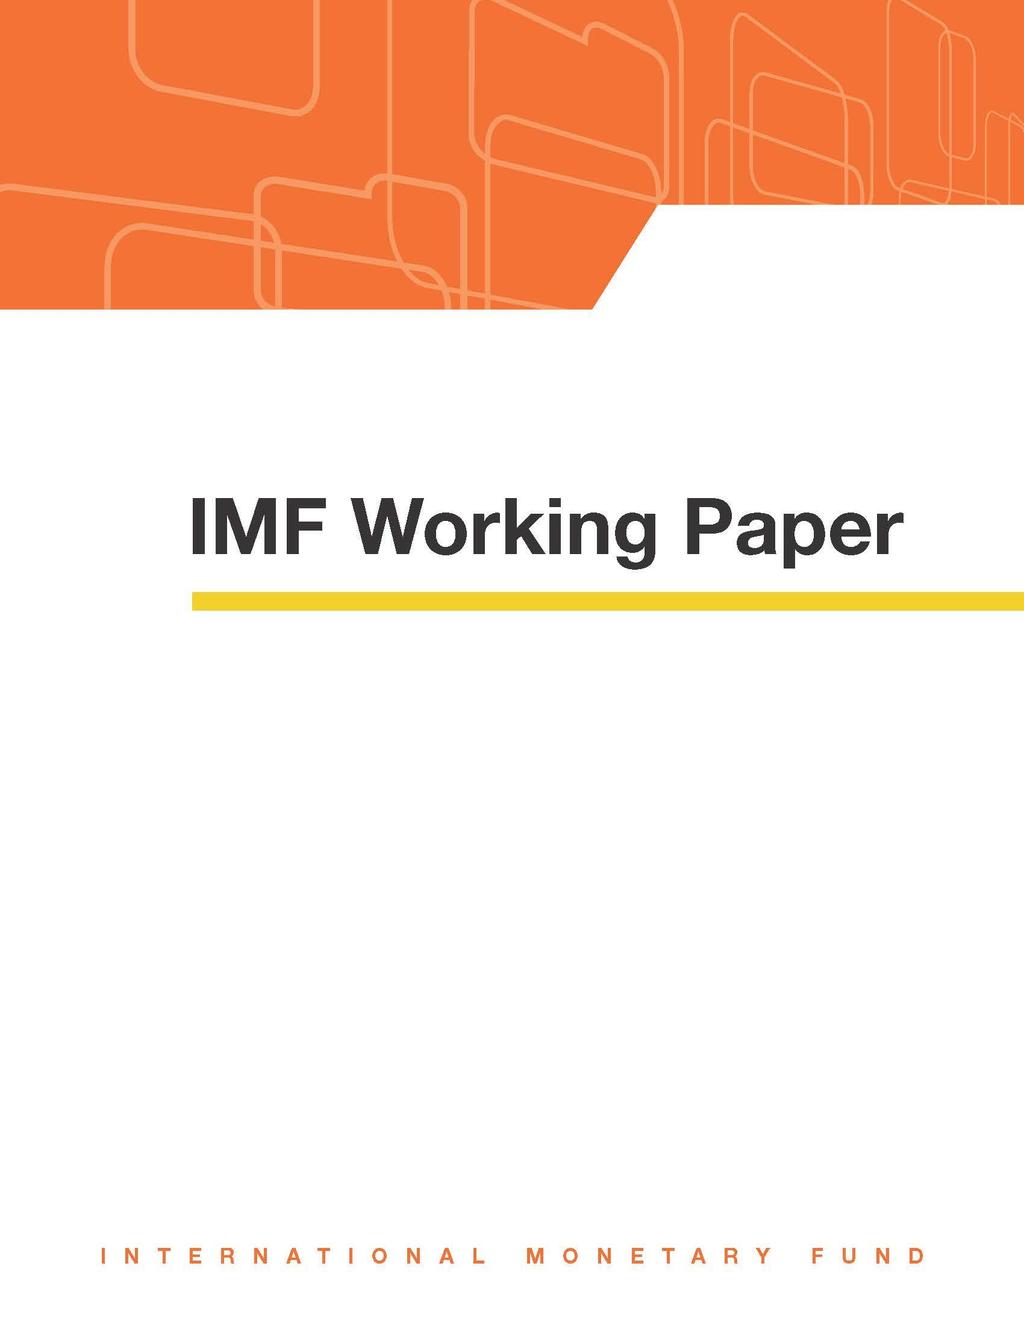 WP/17/194 Western Balkans: Increasing Women s Role in the Economy by Ruben Atoyan and Jesmin Rahman IMF Working Papers describe research in progress by the author(s) and are published to elicit